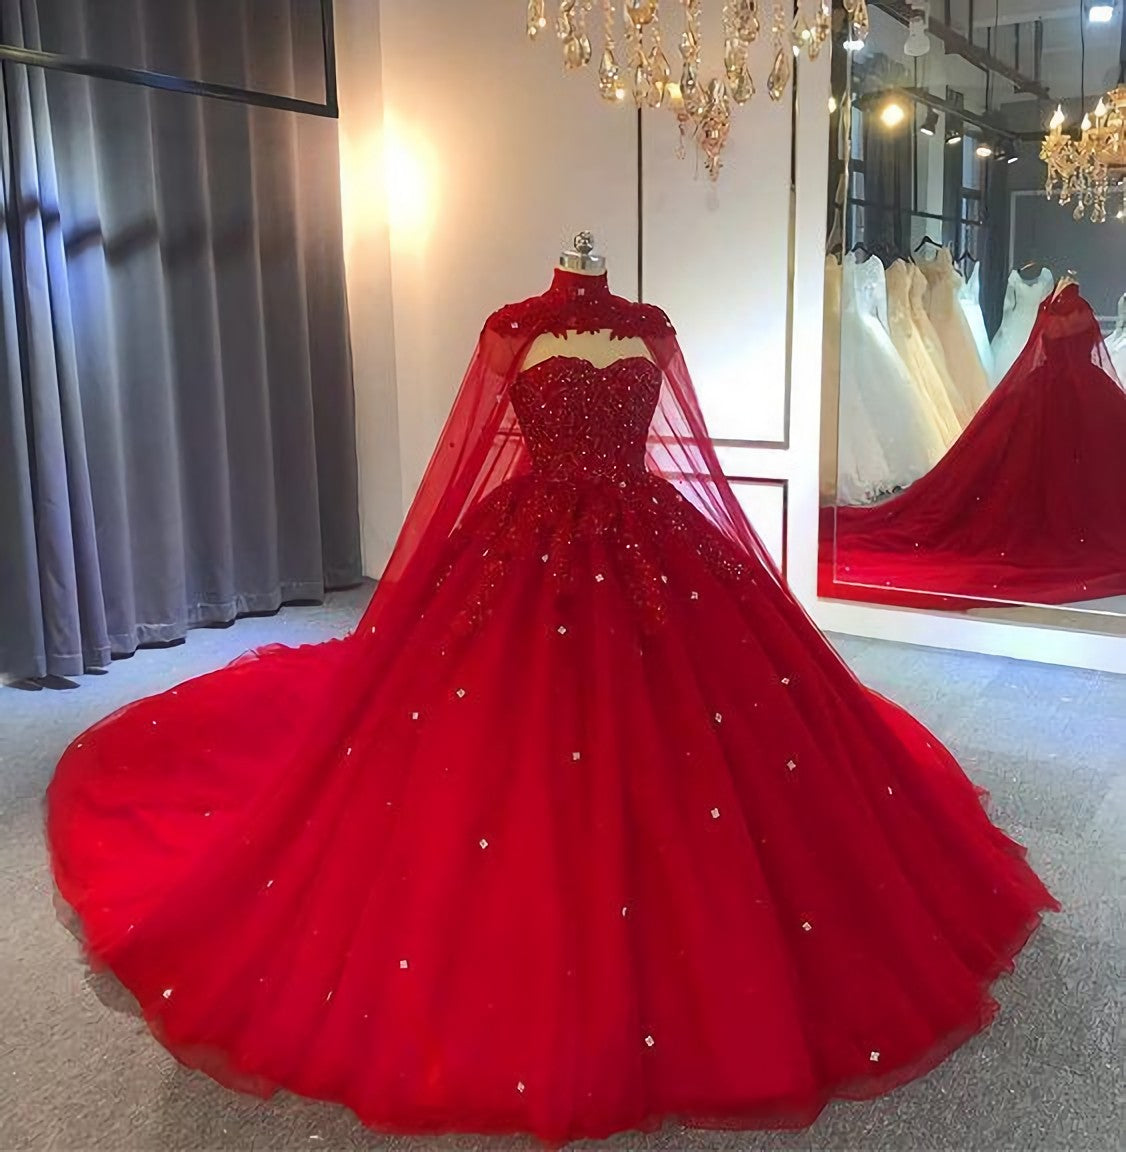 Tulle Corset Ball Gown Corset Wedding Dress, With Cape Corset Prom Dresses, Evening Dresses outfit, Wedding Dress Colors